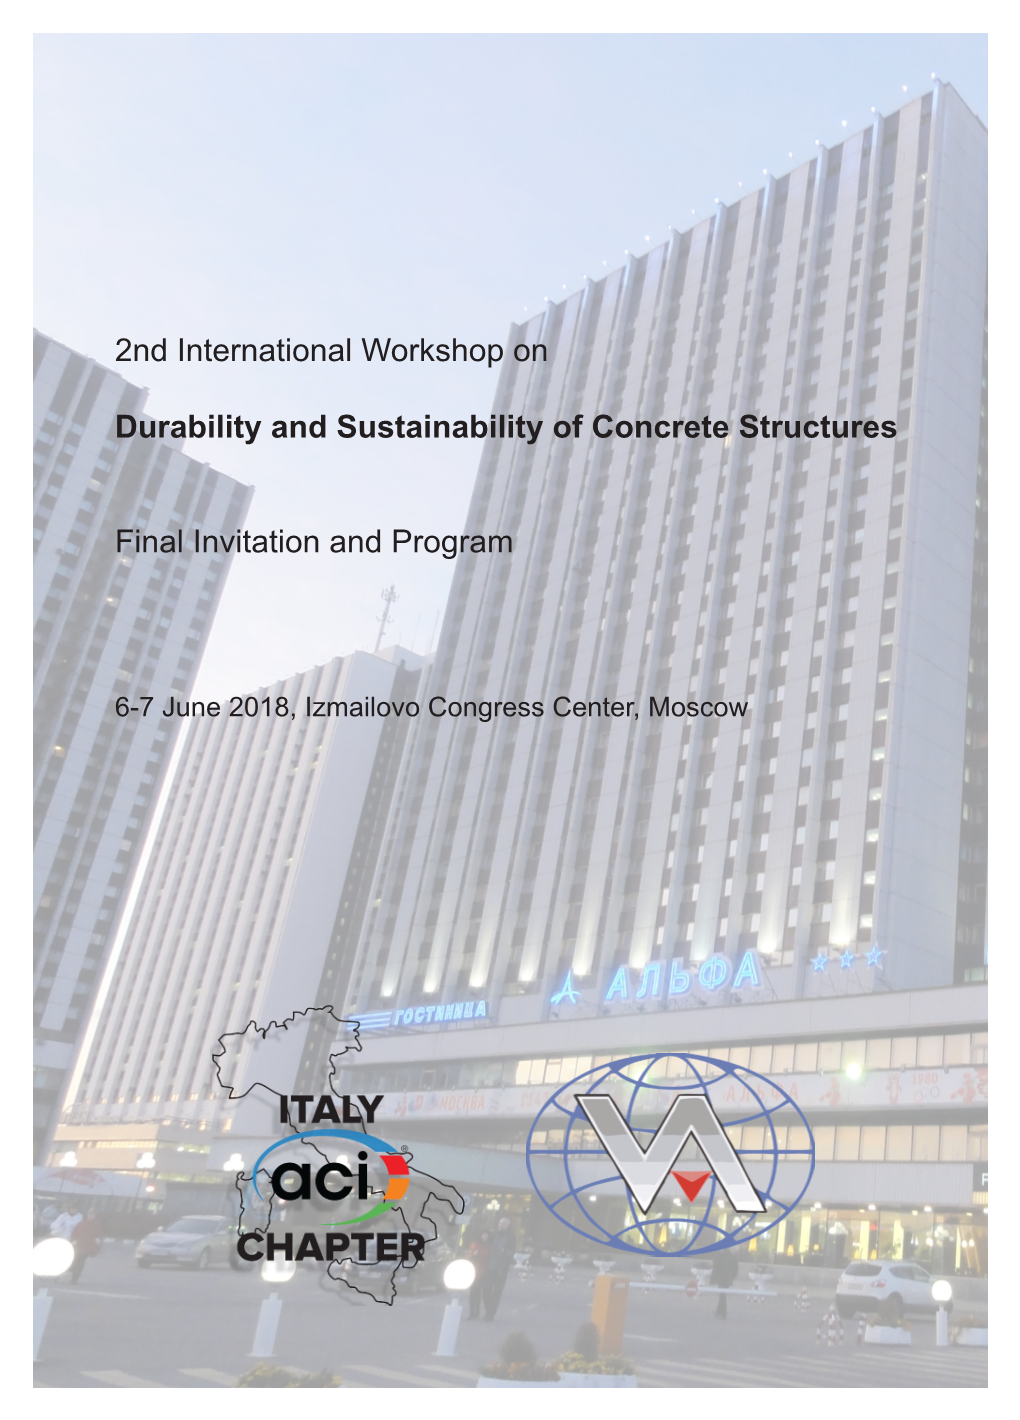 2Nd International Workshop on Durability and Sustainability of Concrete Structures 6-7 June 2018, Izmailovo Congress Center, Moscow